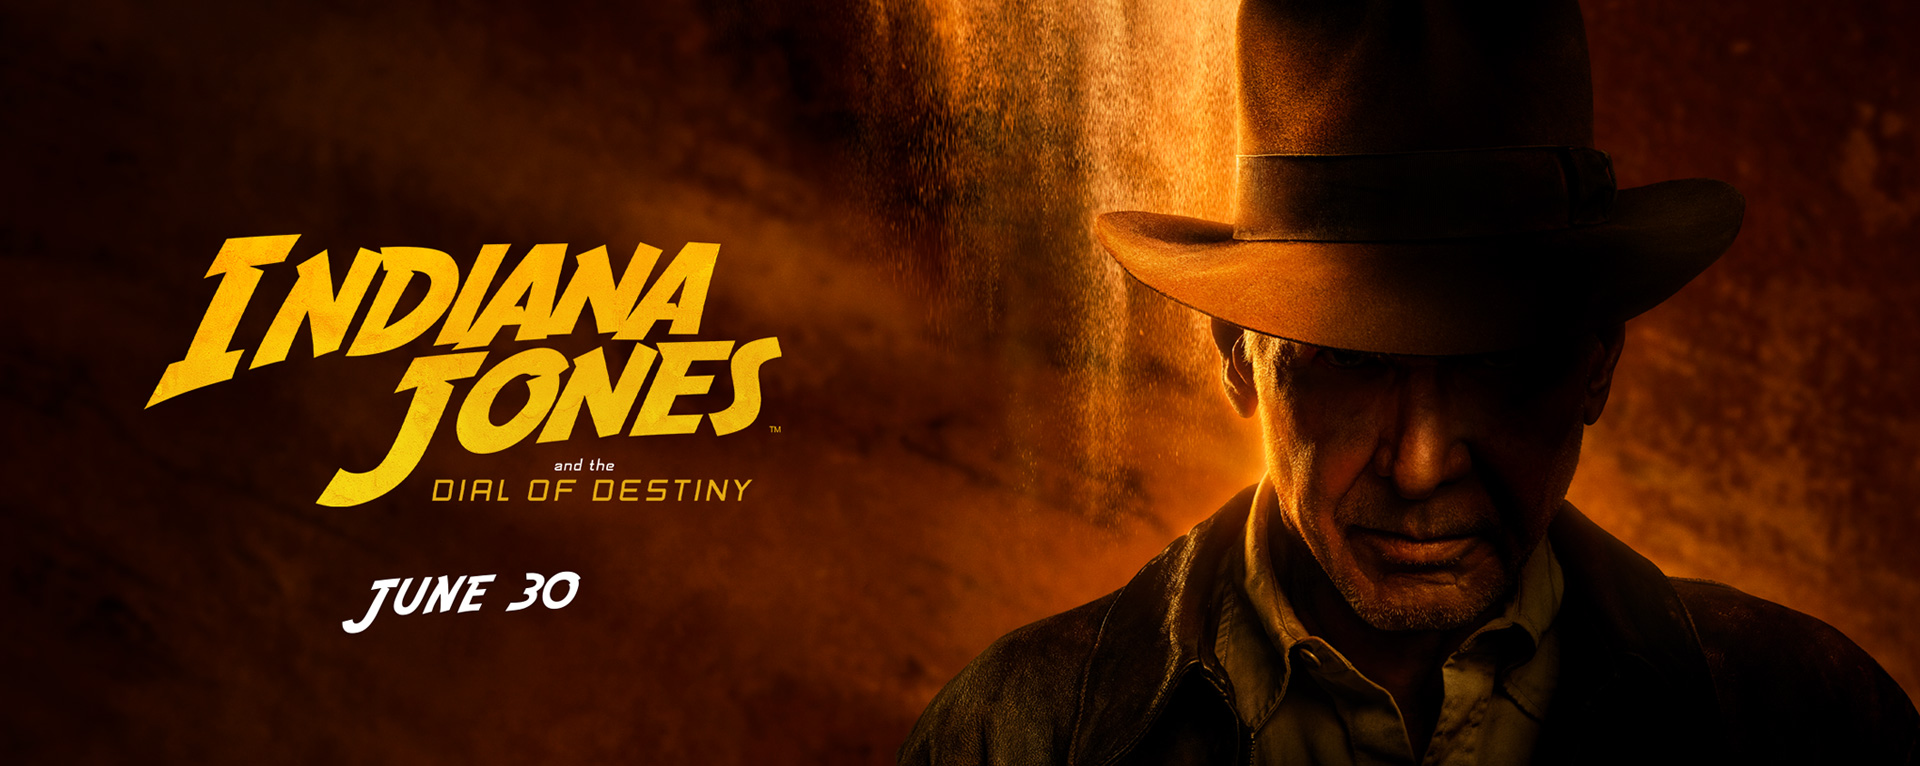 Indiana-Jones-and-the-Dial-of-Destiny-Marquee-B